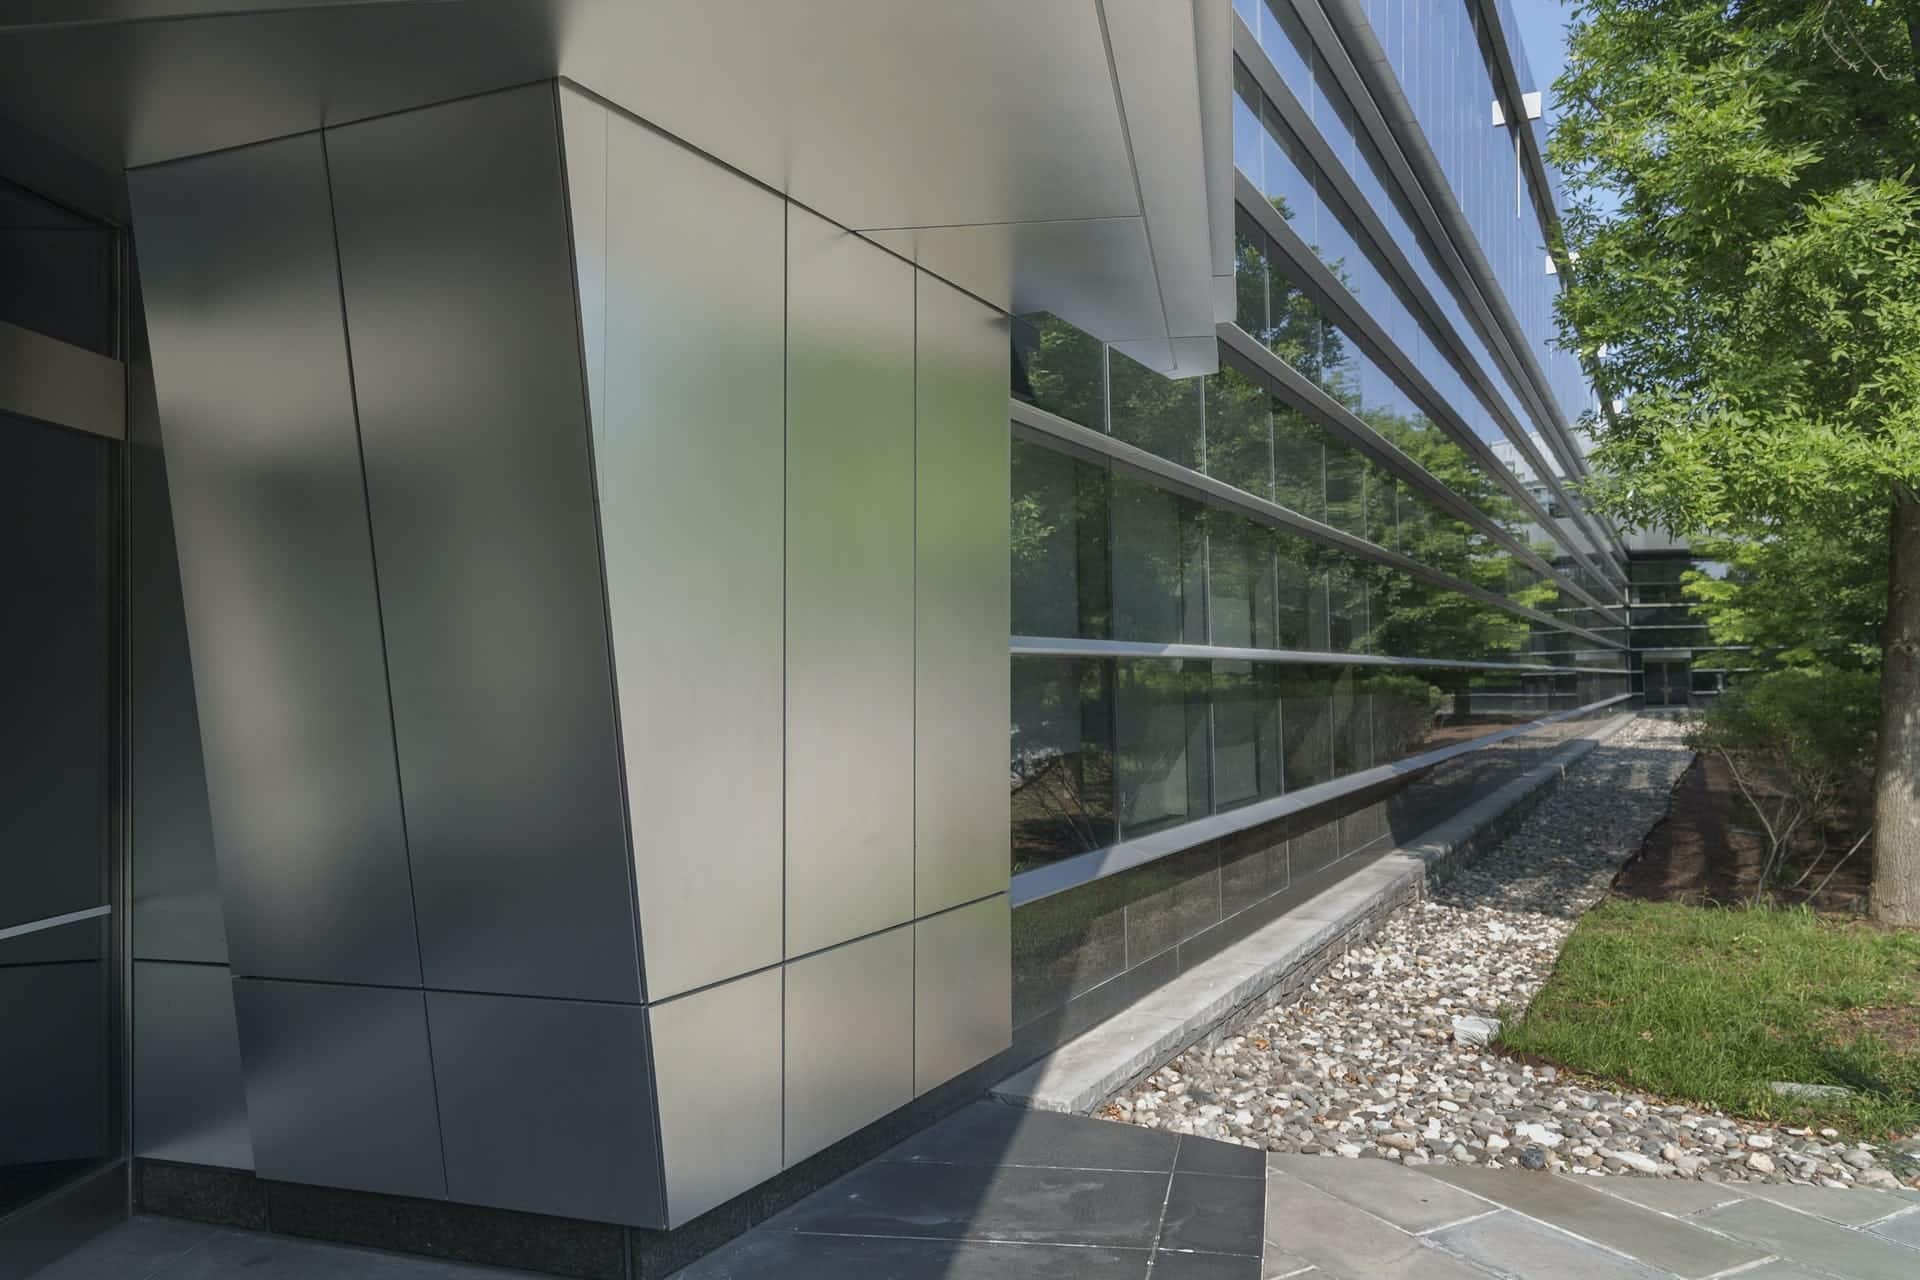 GB-60 STAINLESS STEEL USED ON THE KPF-DESIGNED IBM HEADQUARTERS IN ARMONK, NEW YORK.